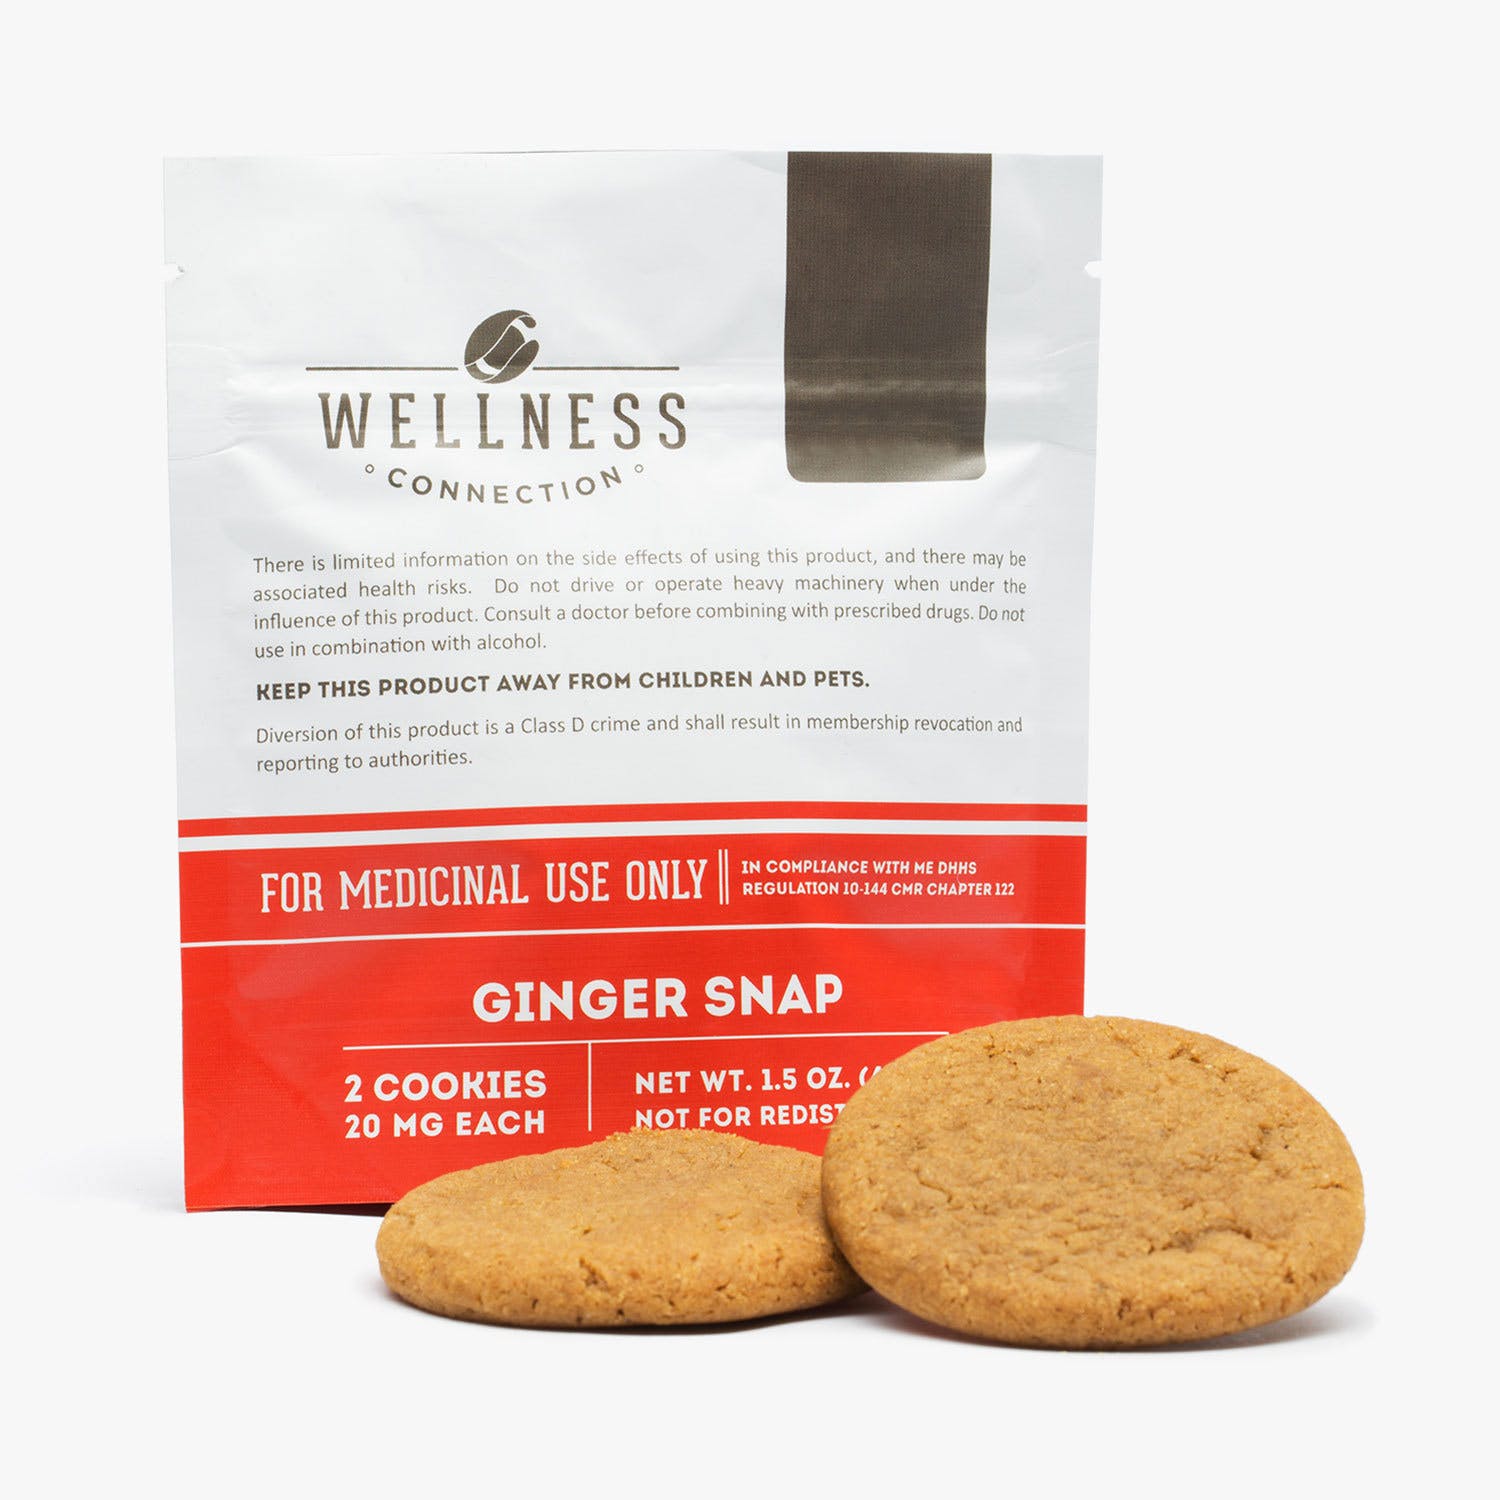 Ginger Cookies—40mg